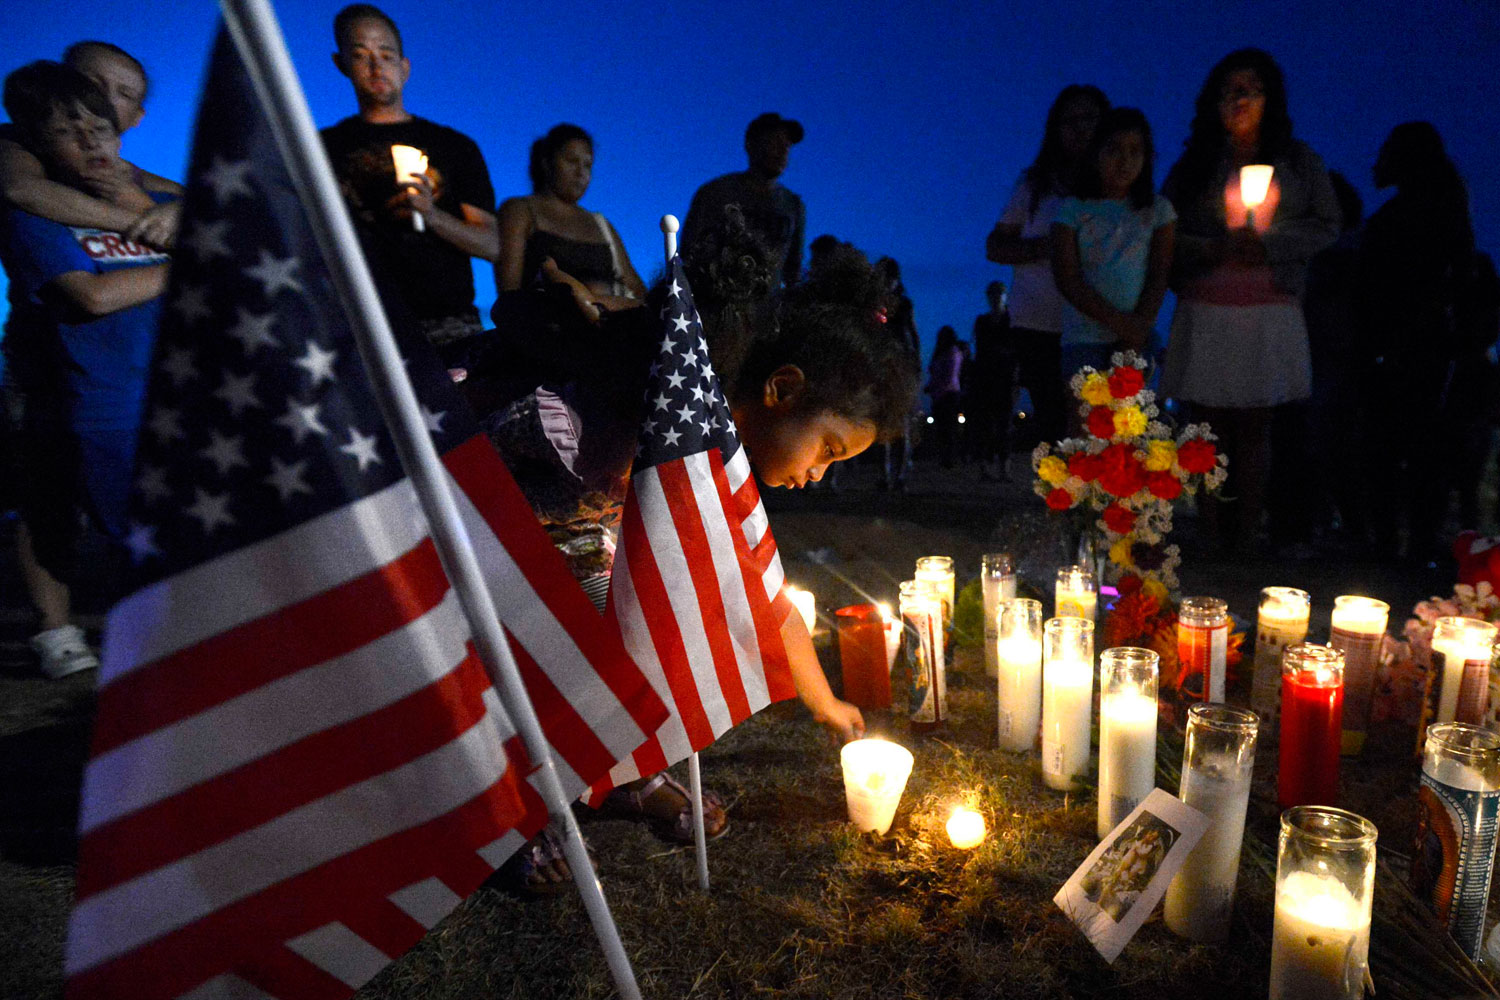 July 20, 2012. Myia Young, 4, places a candle by an American flag during a vigil for victims behind a theater where James Holm opened fire on moviegoers in Aurora, Colo.